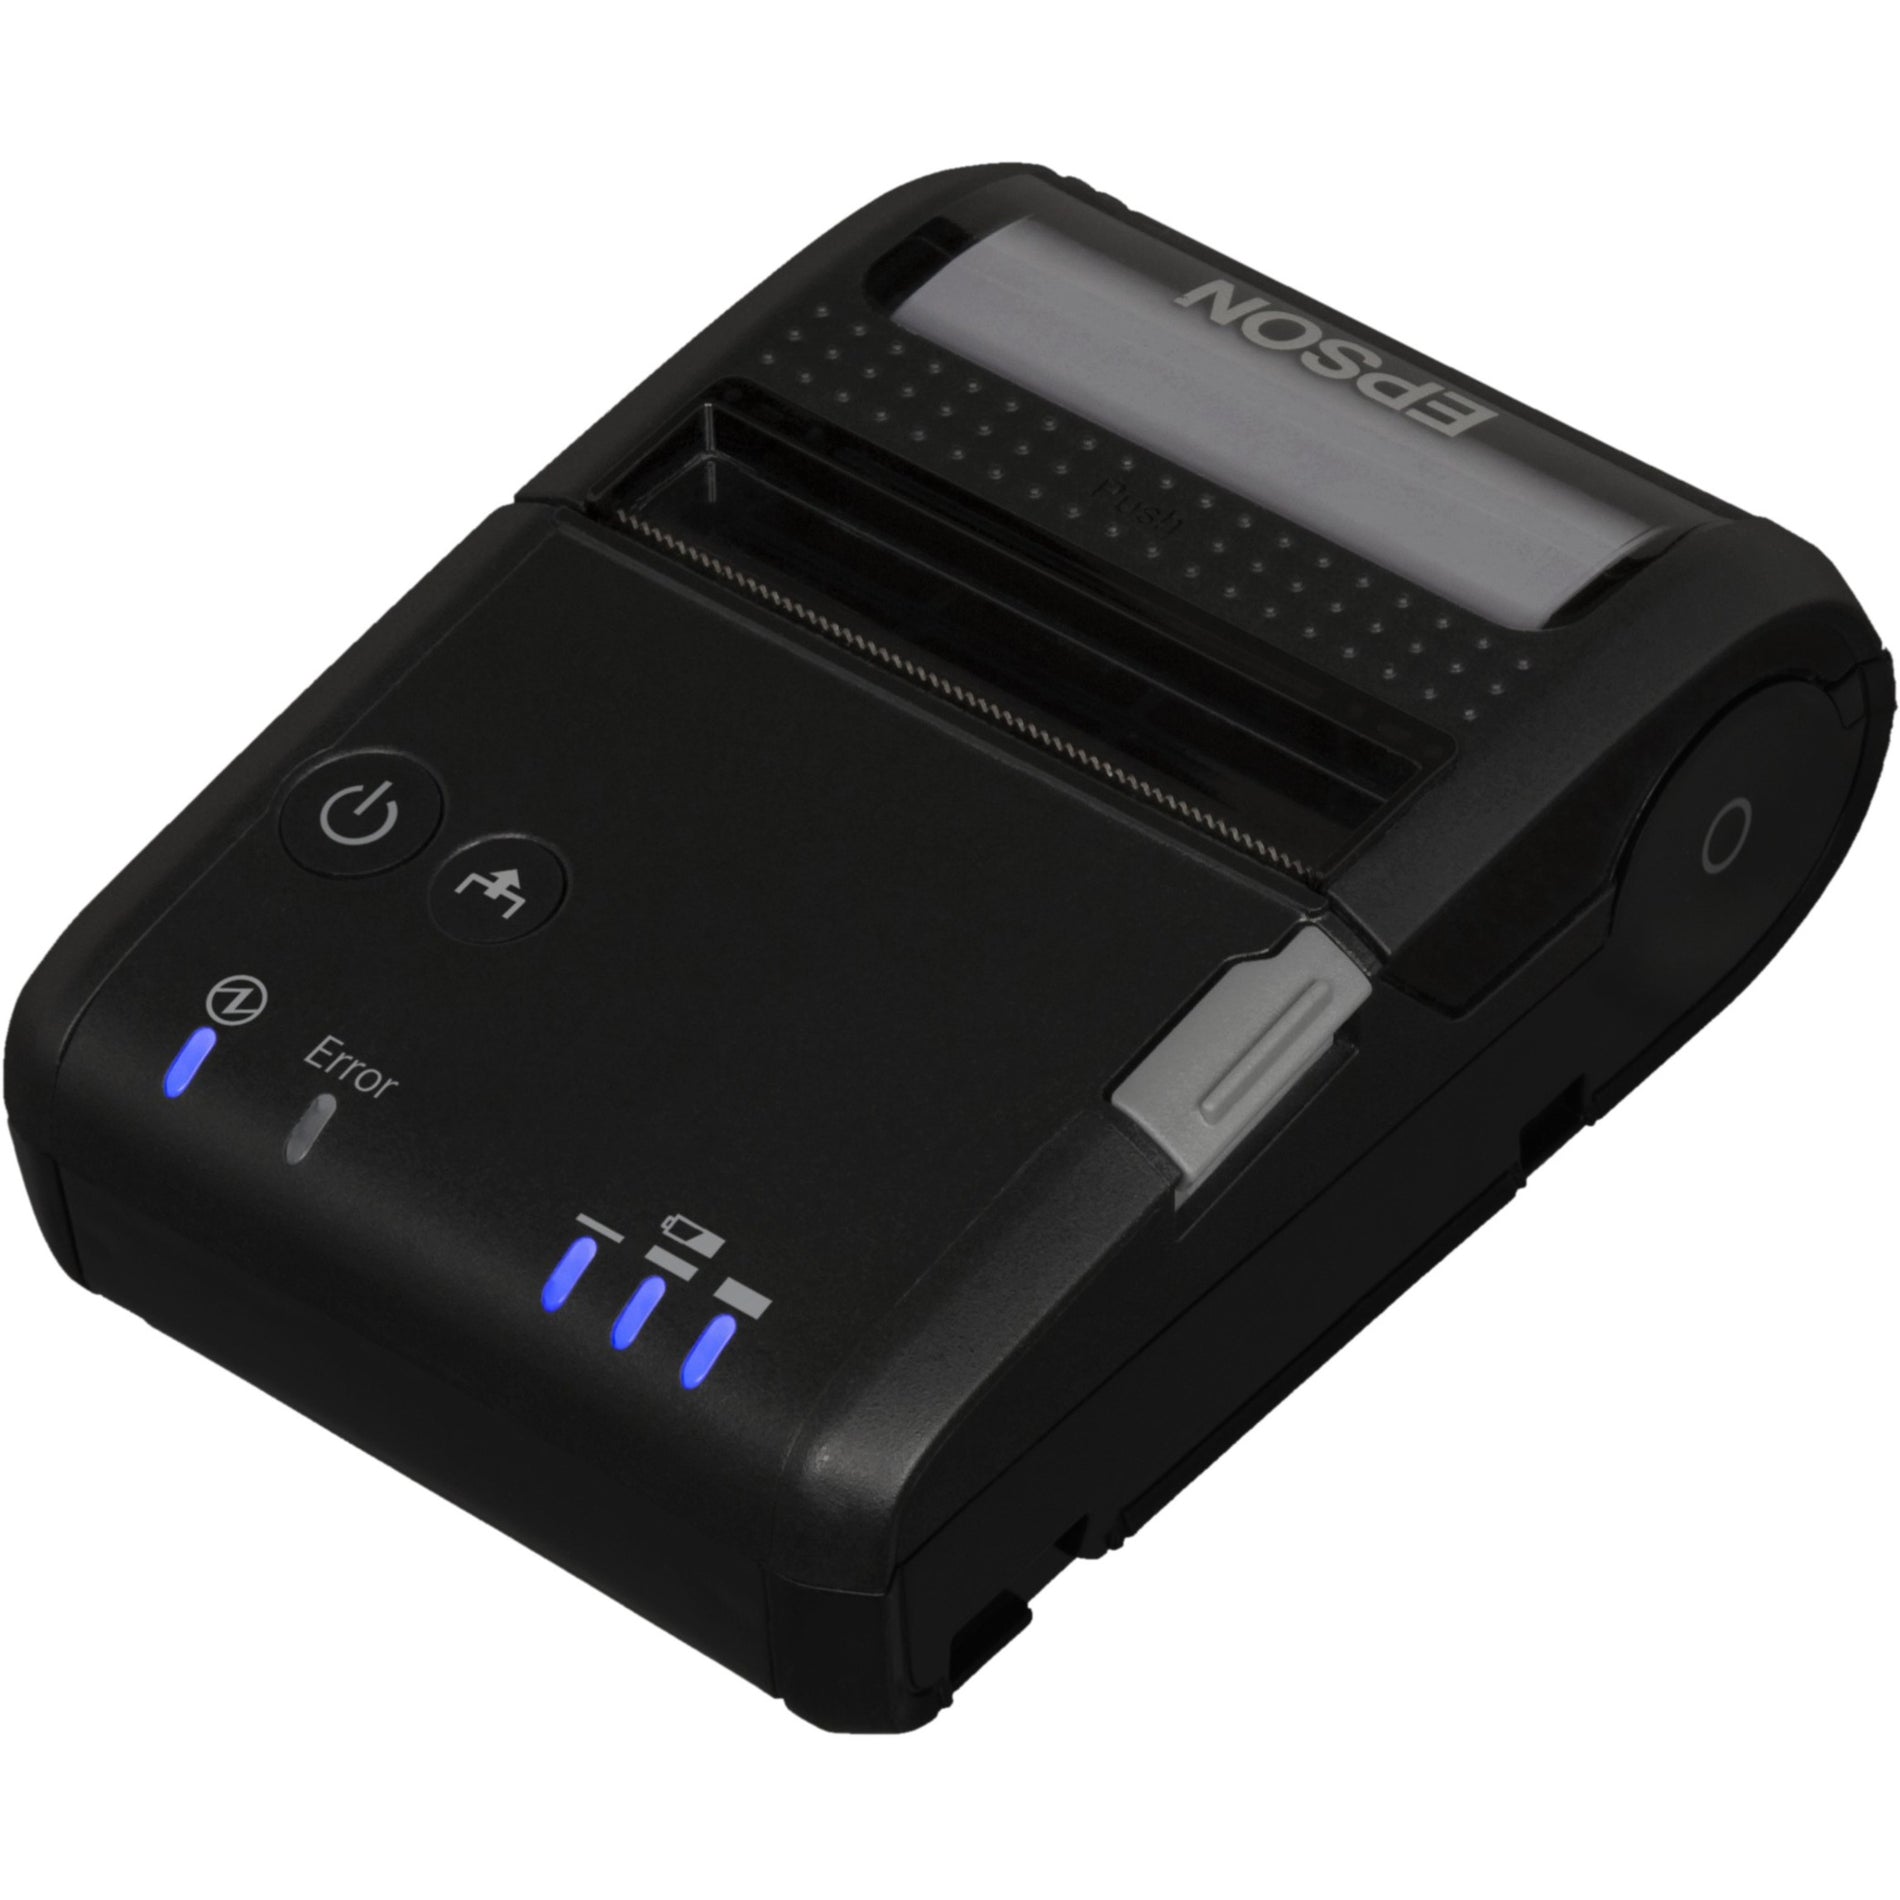 Epson C31CE14551 Mobilink P20 2" Mobile Printer, Bluetooth, Battery Included